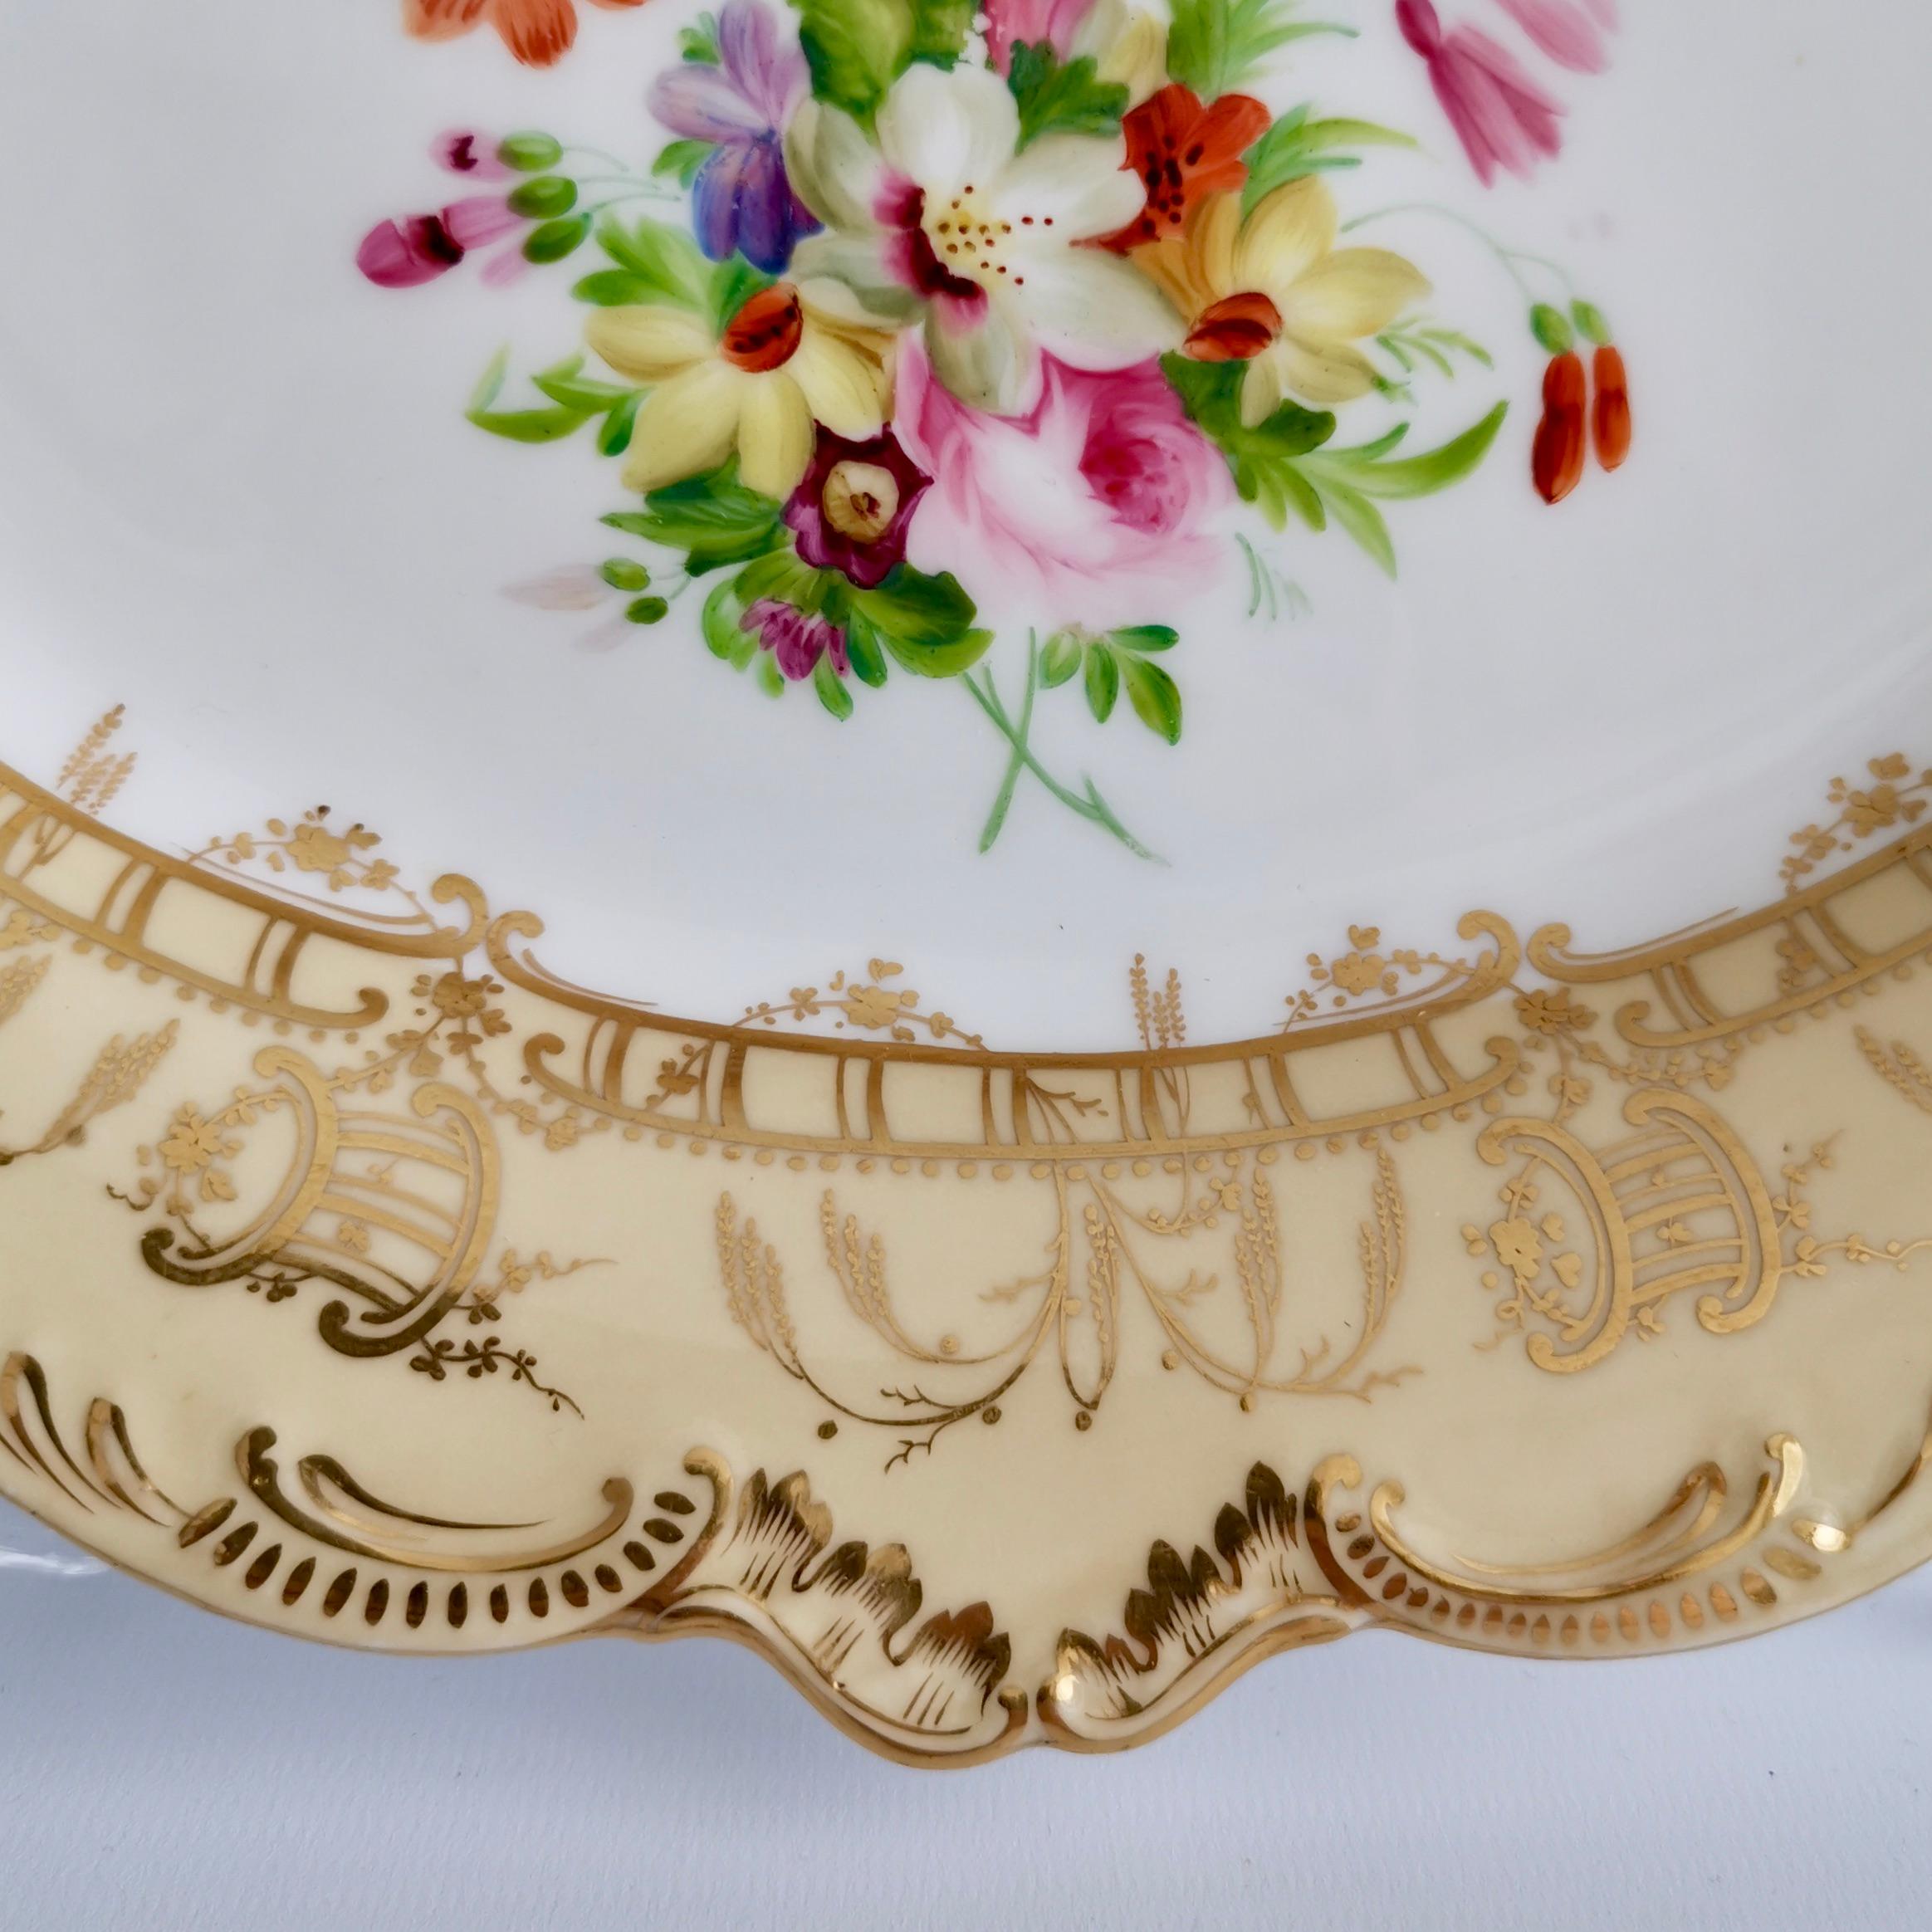 Coalport Set of 2 Oval Dessert Dishes, Beige with Flowers by Thomas Dixon, 1847 2